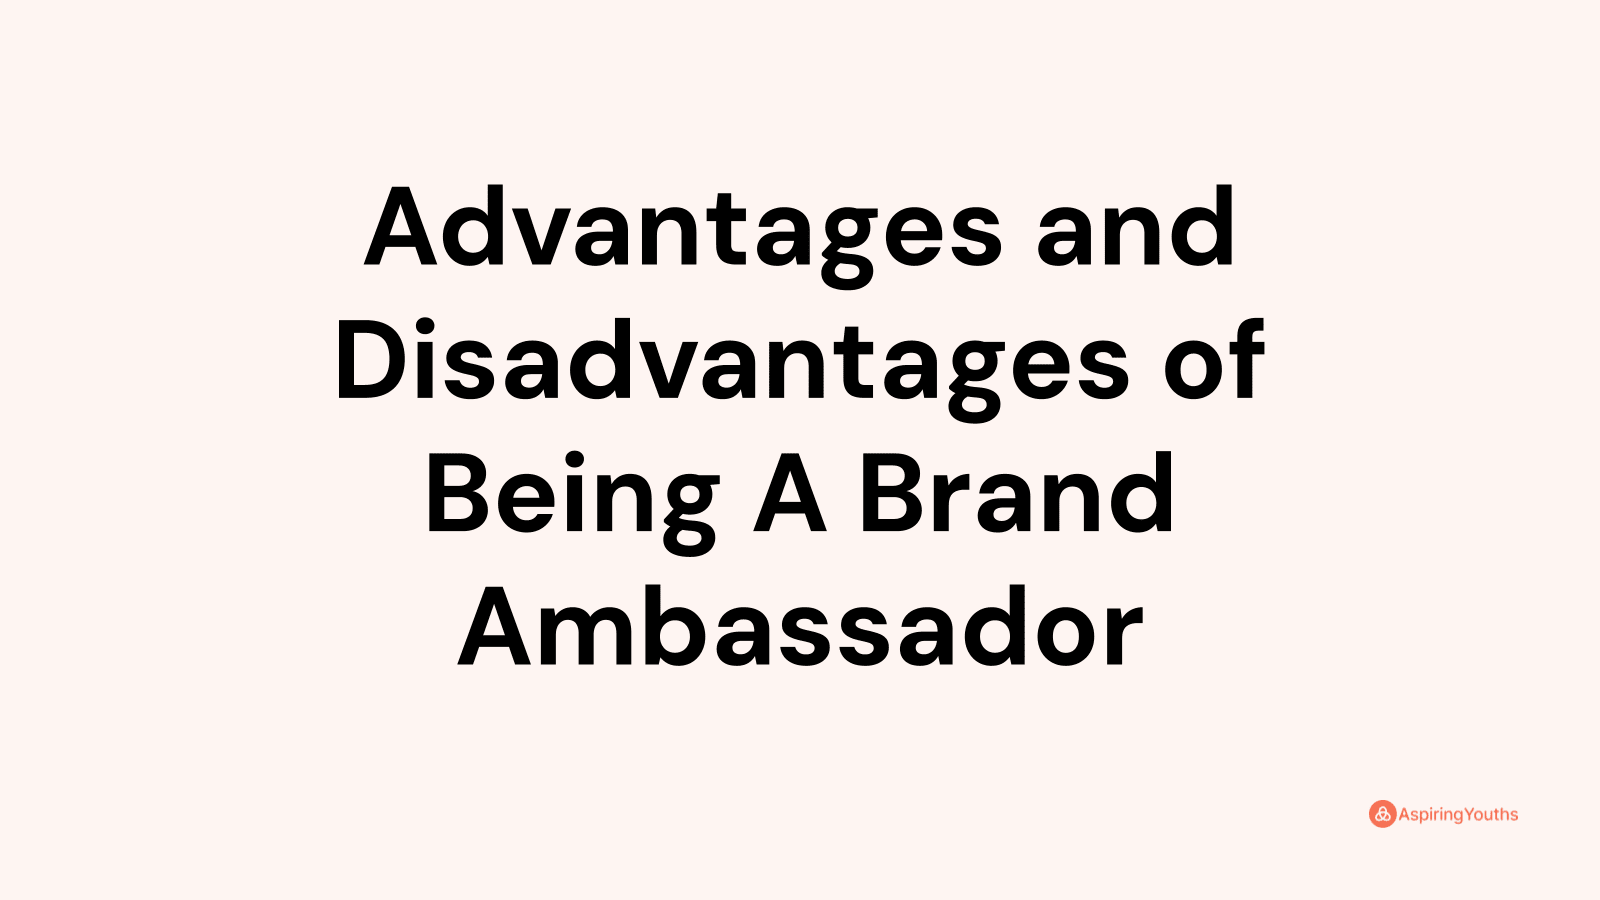 Advantages and disadvantages of Being A Brand Ambassador